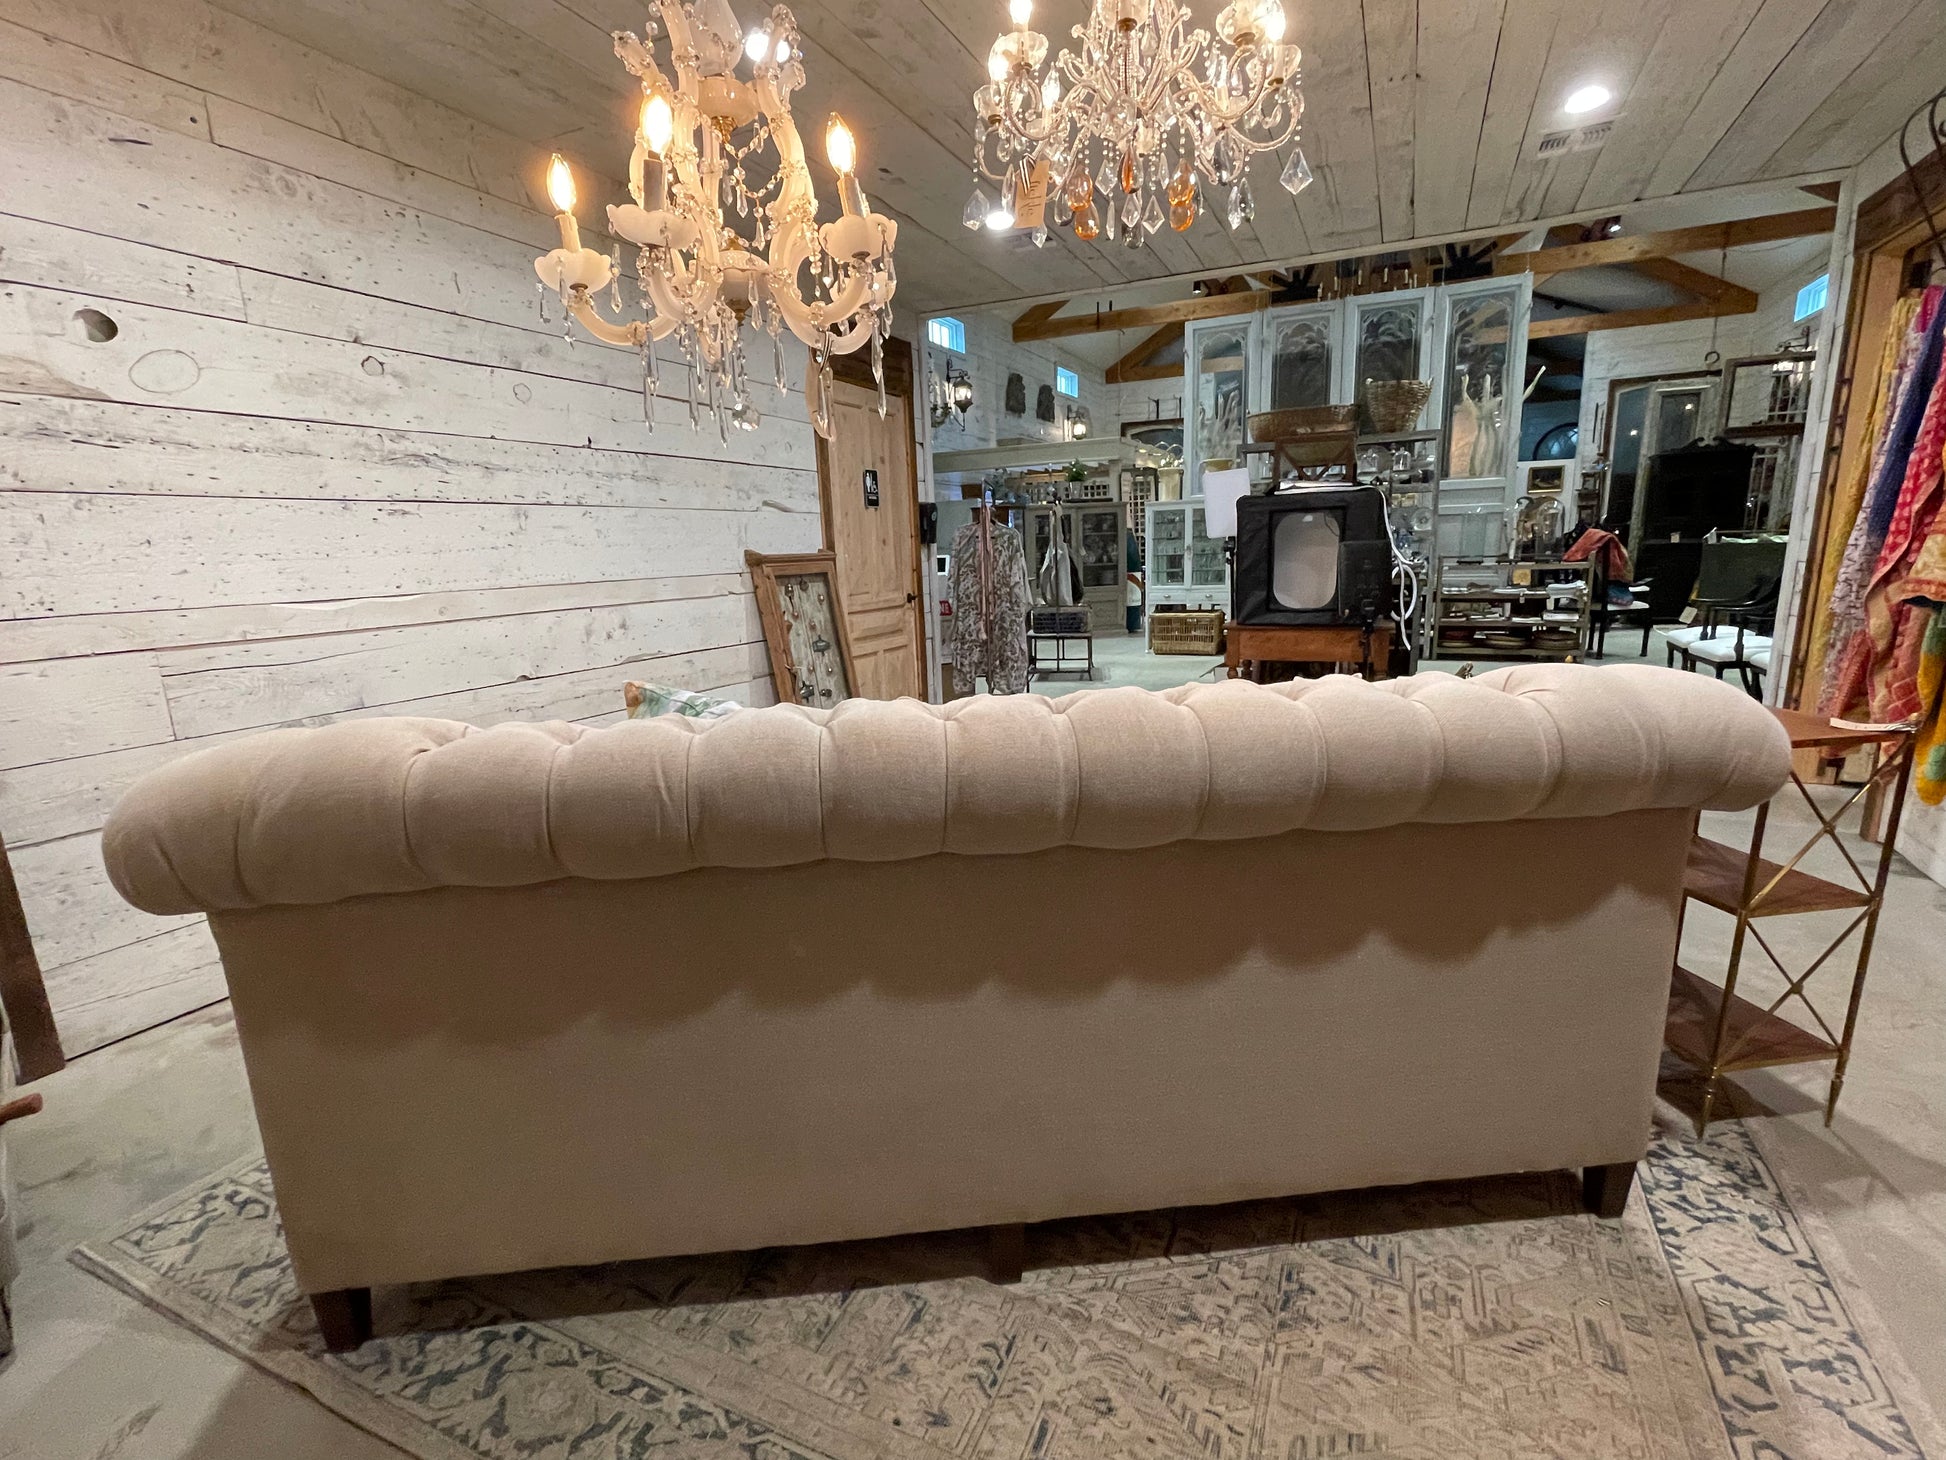 Oversized Couch or Sofa - The White Barn Antiques